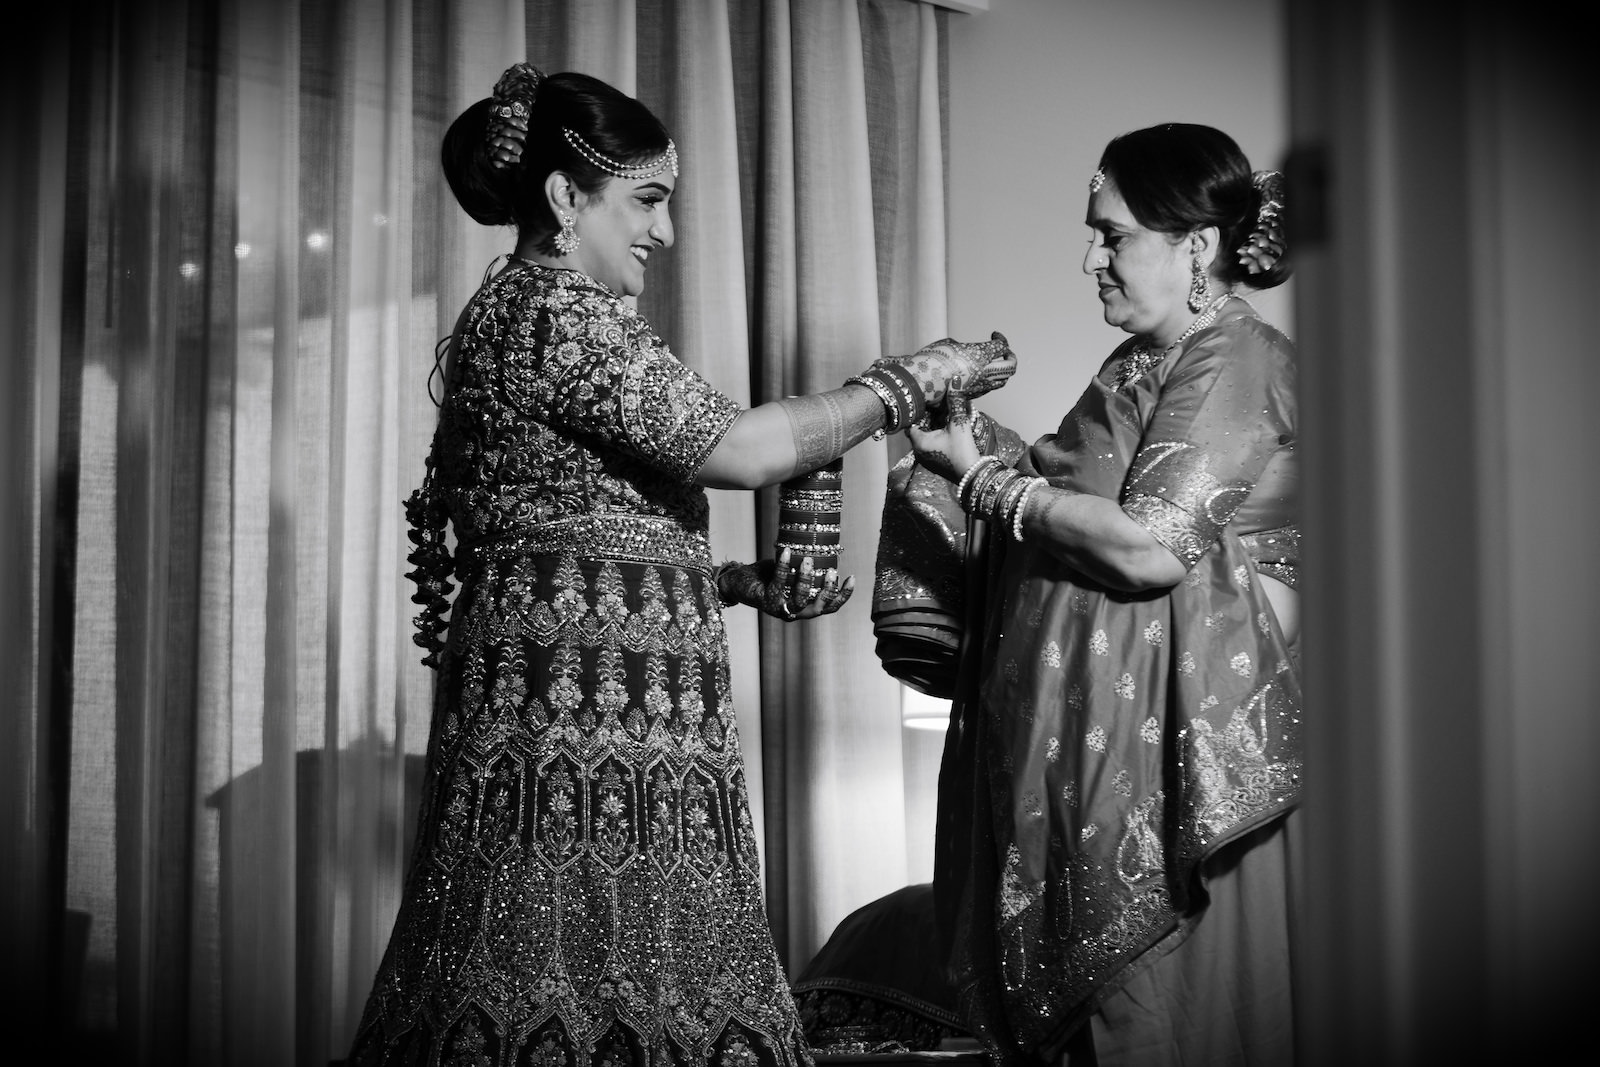 Black and White Wedding Photography | Indian Wedding Tampa Florida | Mother of the Bride Helping Bride Get Dressed